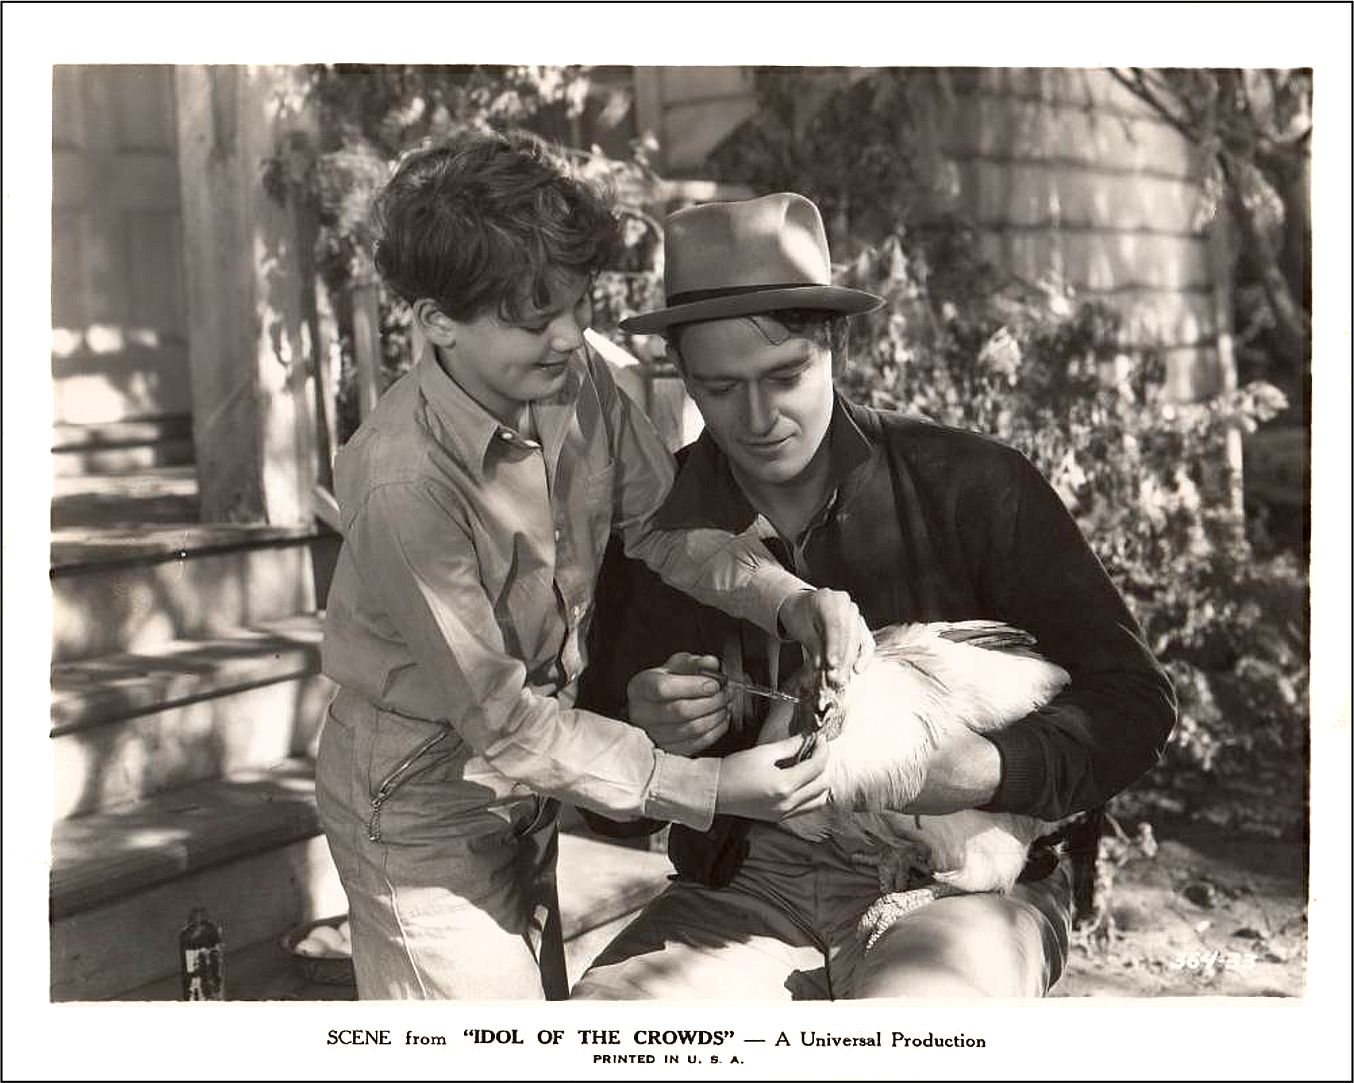 Idol of the Crowds John Wayne 1937 chicken and a kid